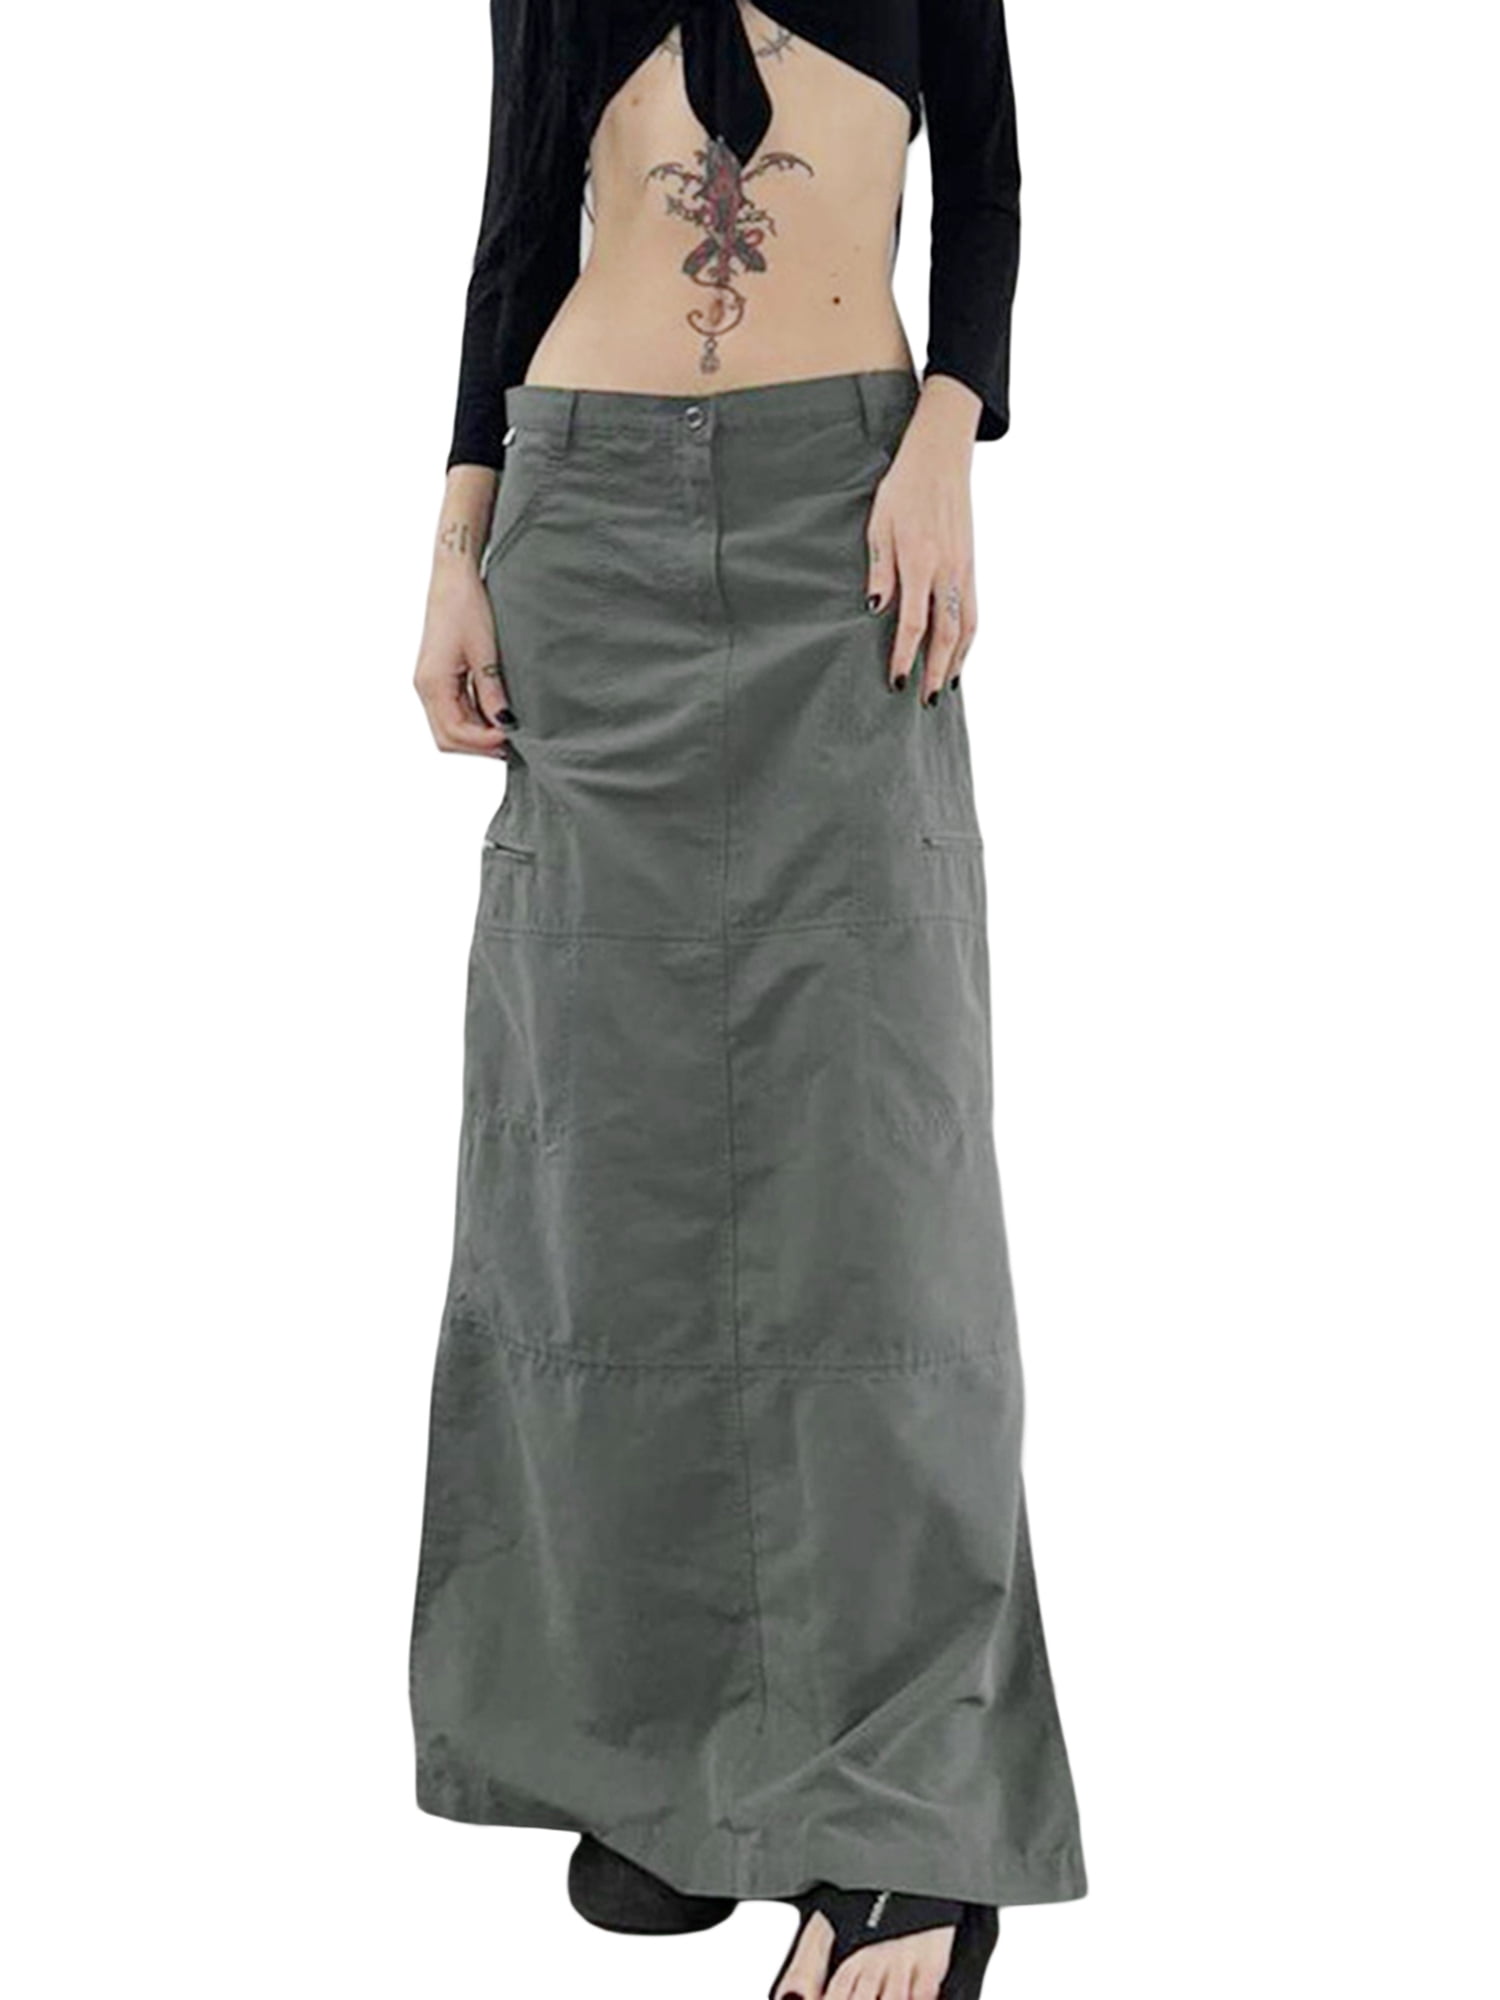 Genuiskids Long Cargo Skirts for Women with Pockets Low Rise Drawstring ...